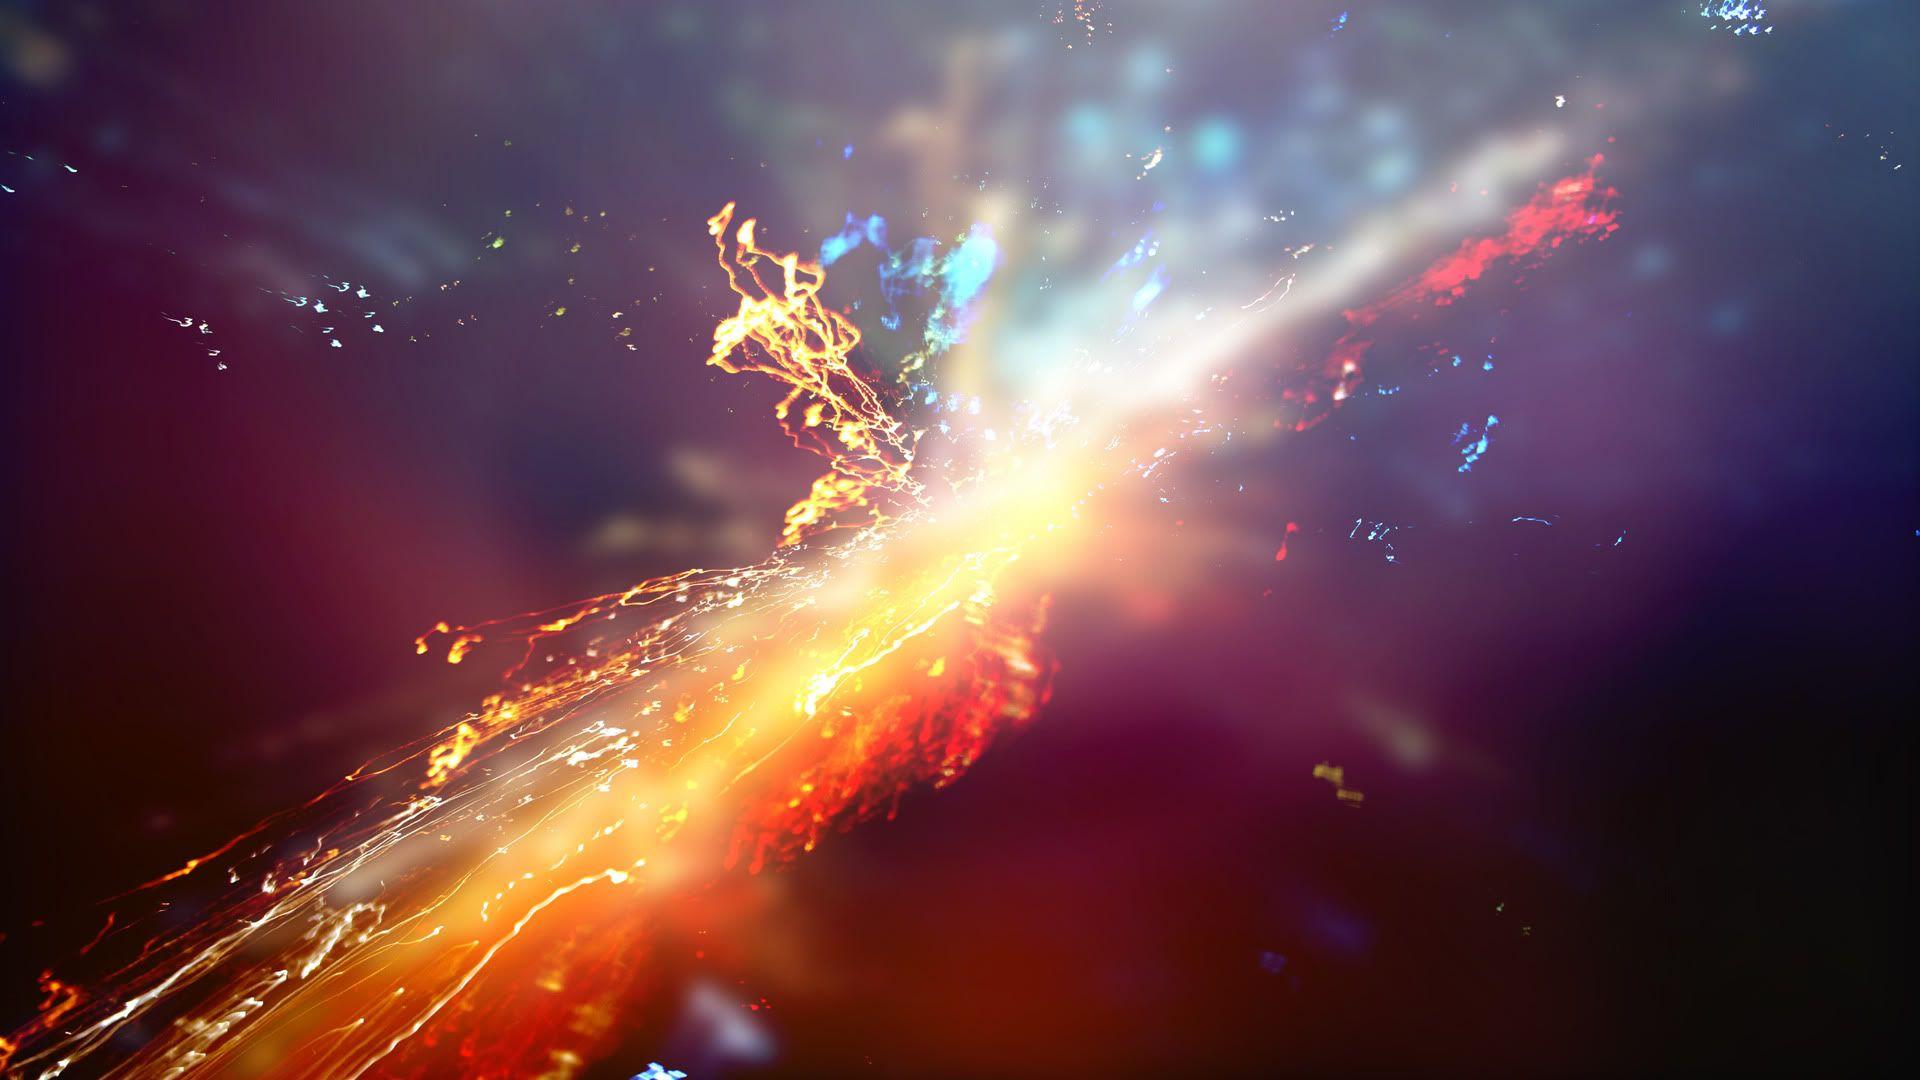 Real Supernova Explosion Hd Pics About Space Wallpaper Wp6608672